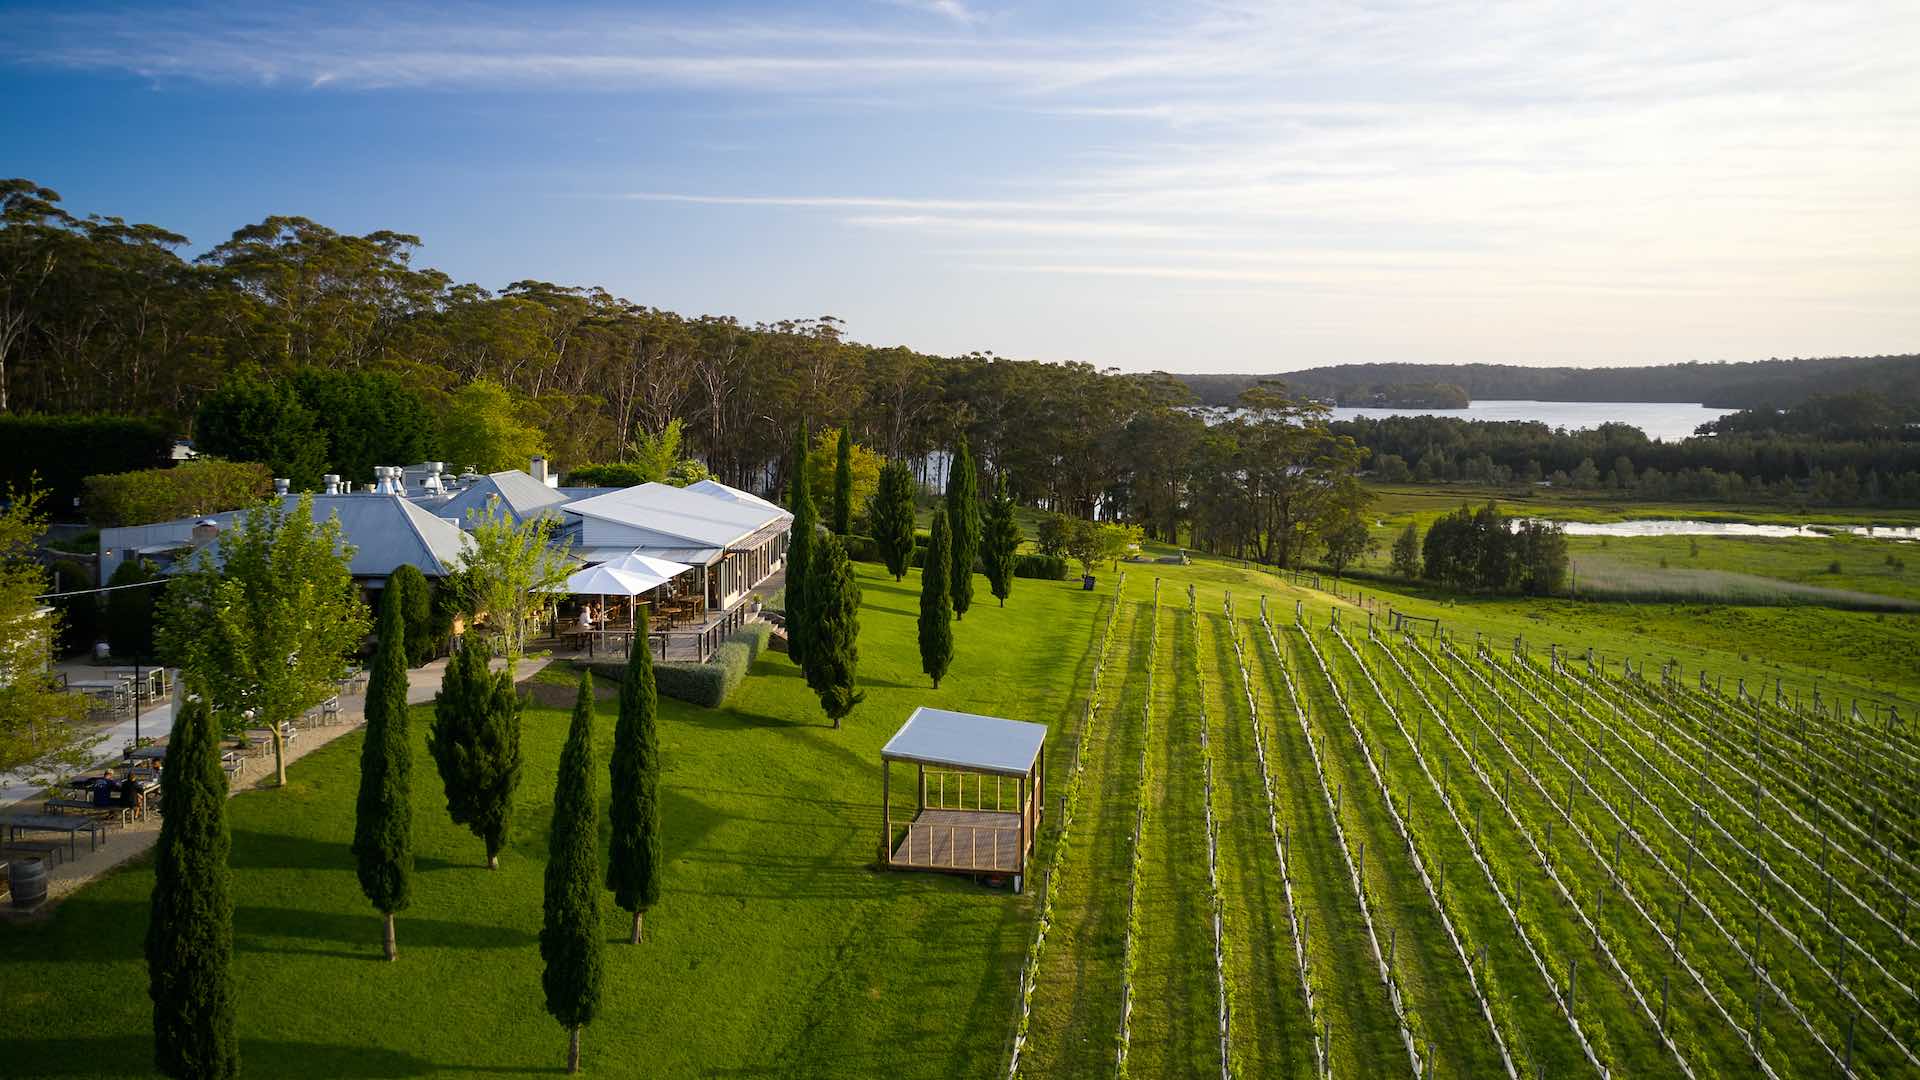 Enjoy an Idyllic Winery Escape on the South Coast with a Bonus $150 Credit to Spend Across the Estate